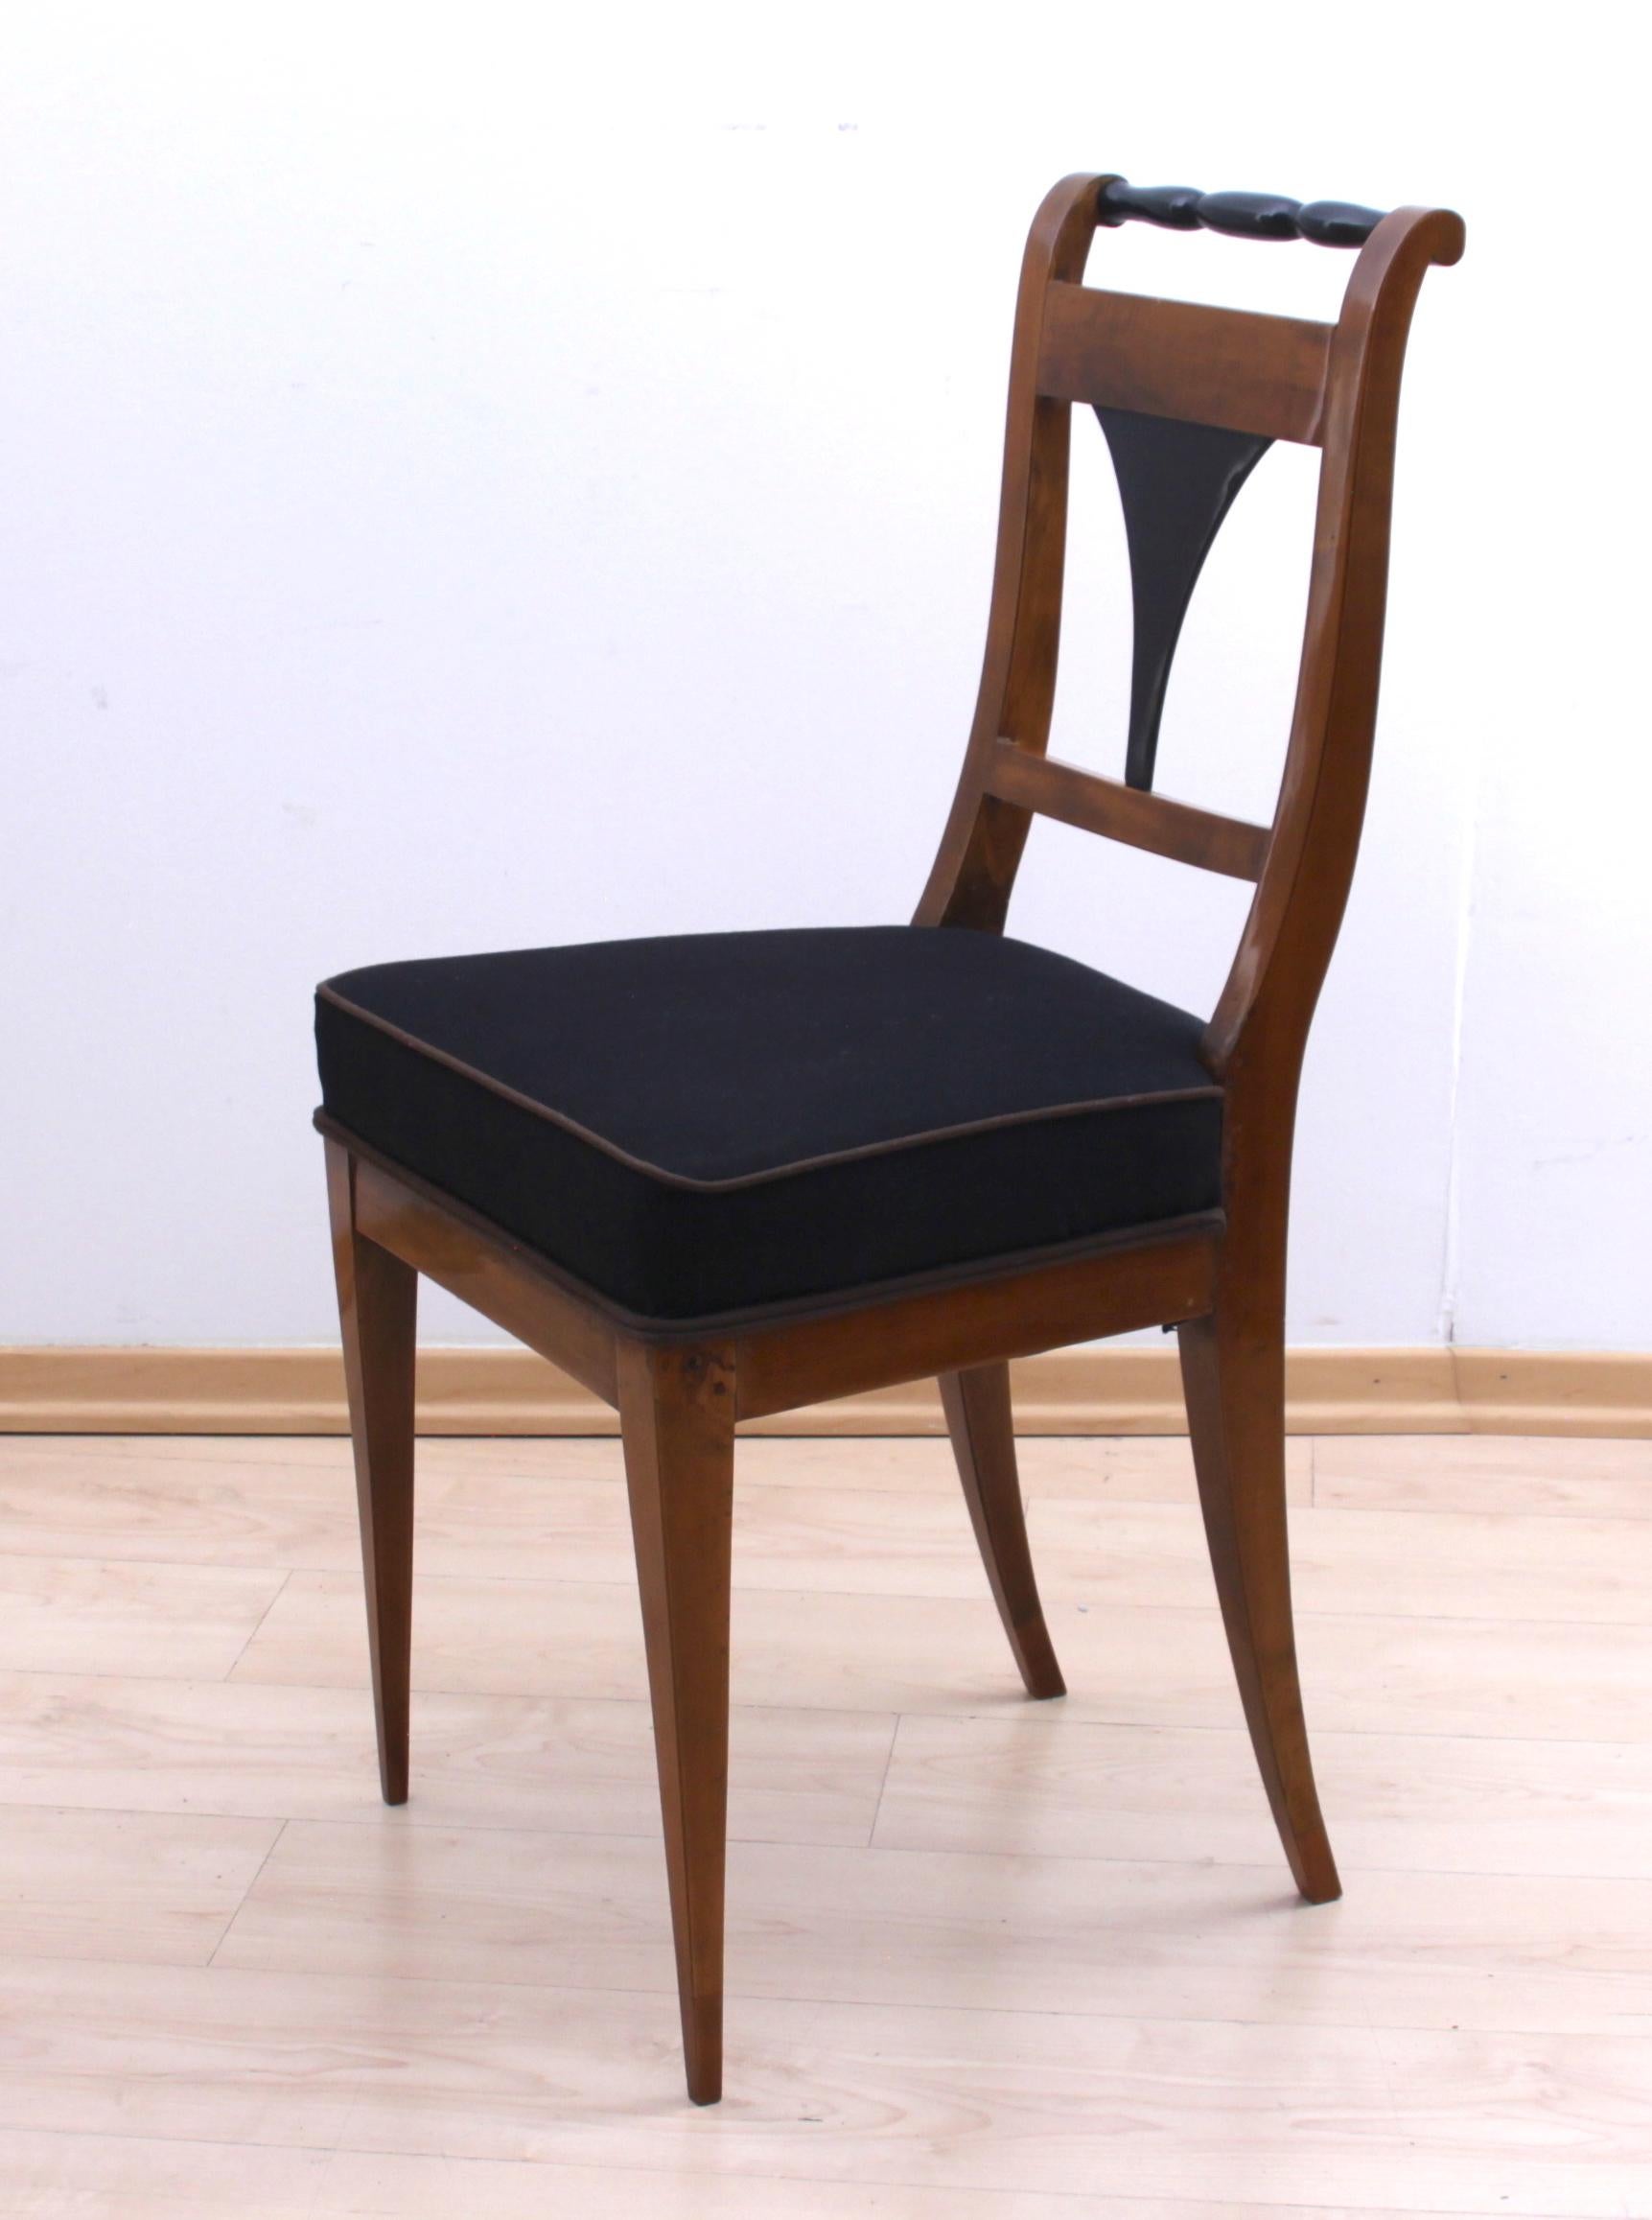 Very classic, plain Biedermeier chair from South Germany, circa 1830.
Cherry veneer and solid wood.
Beautiful ebonized back decor and rung.

For the upholstery fabric a black fabric with brown keder has been chosen.
Great seat comfort.